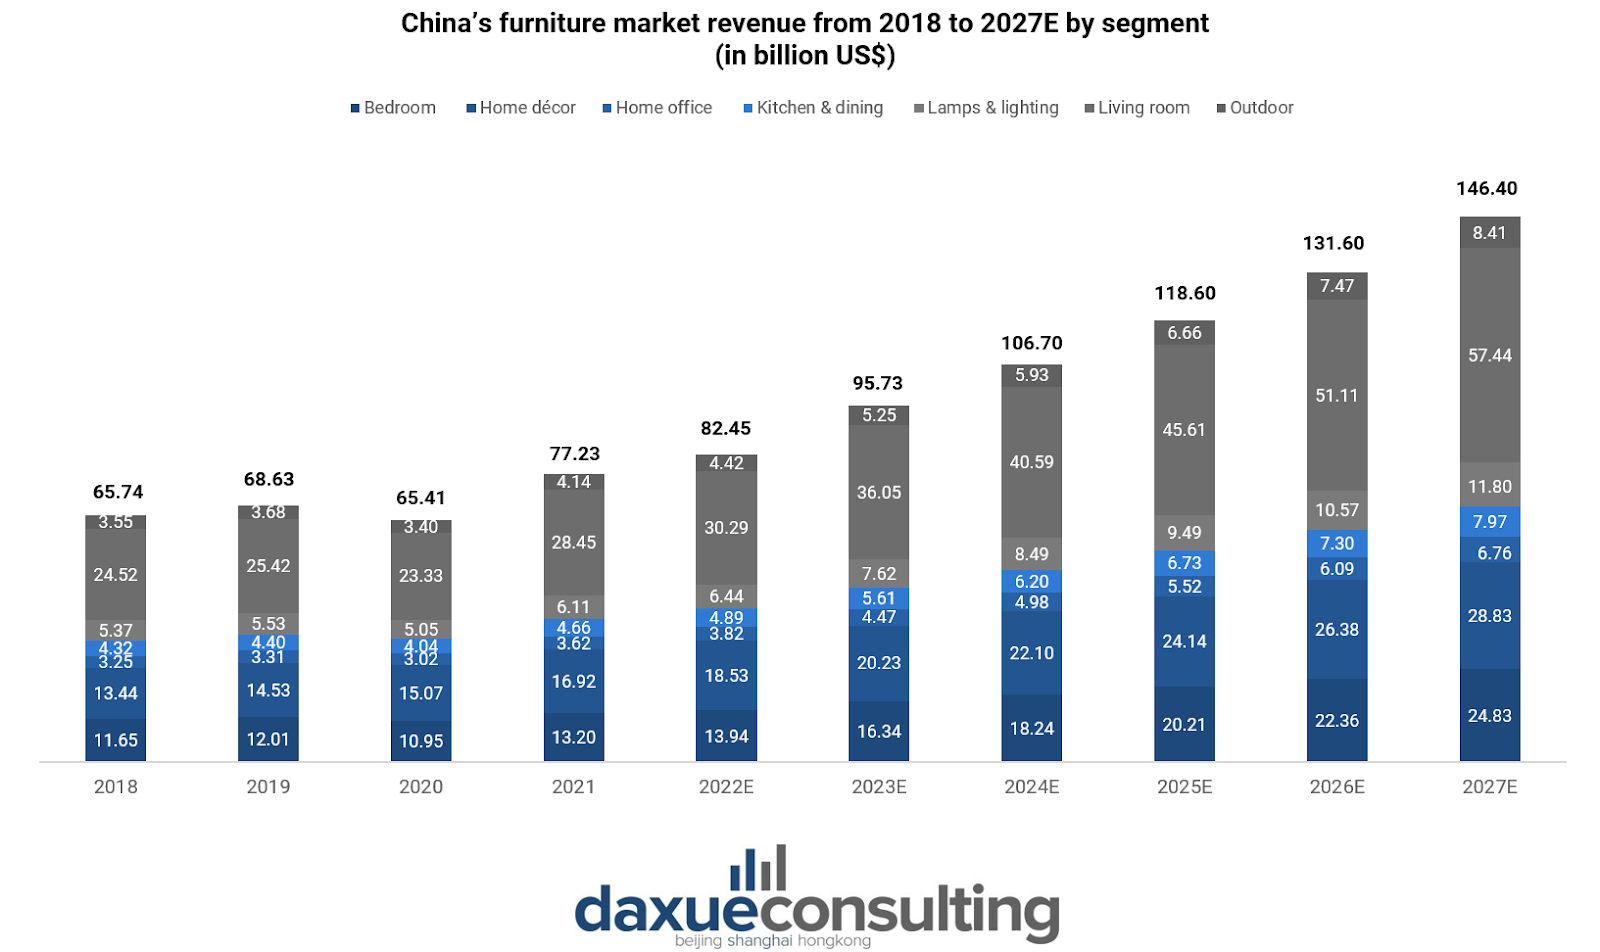 Graph source: Statista, designed by Daxue Consulting, China’s furniture market revenue from 2018 to 2027E by segment